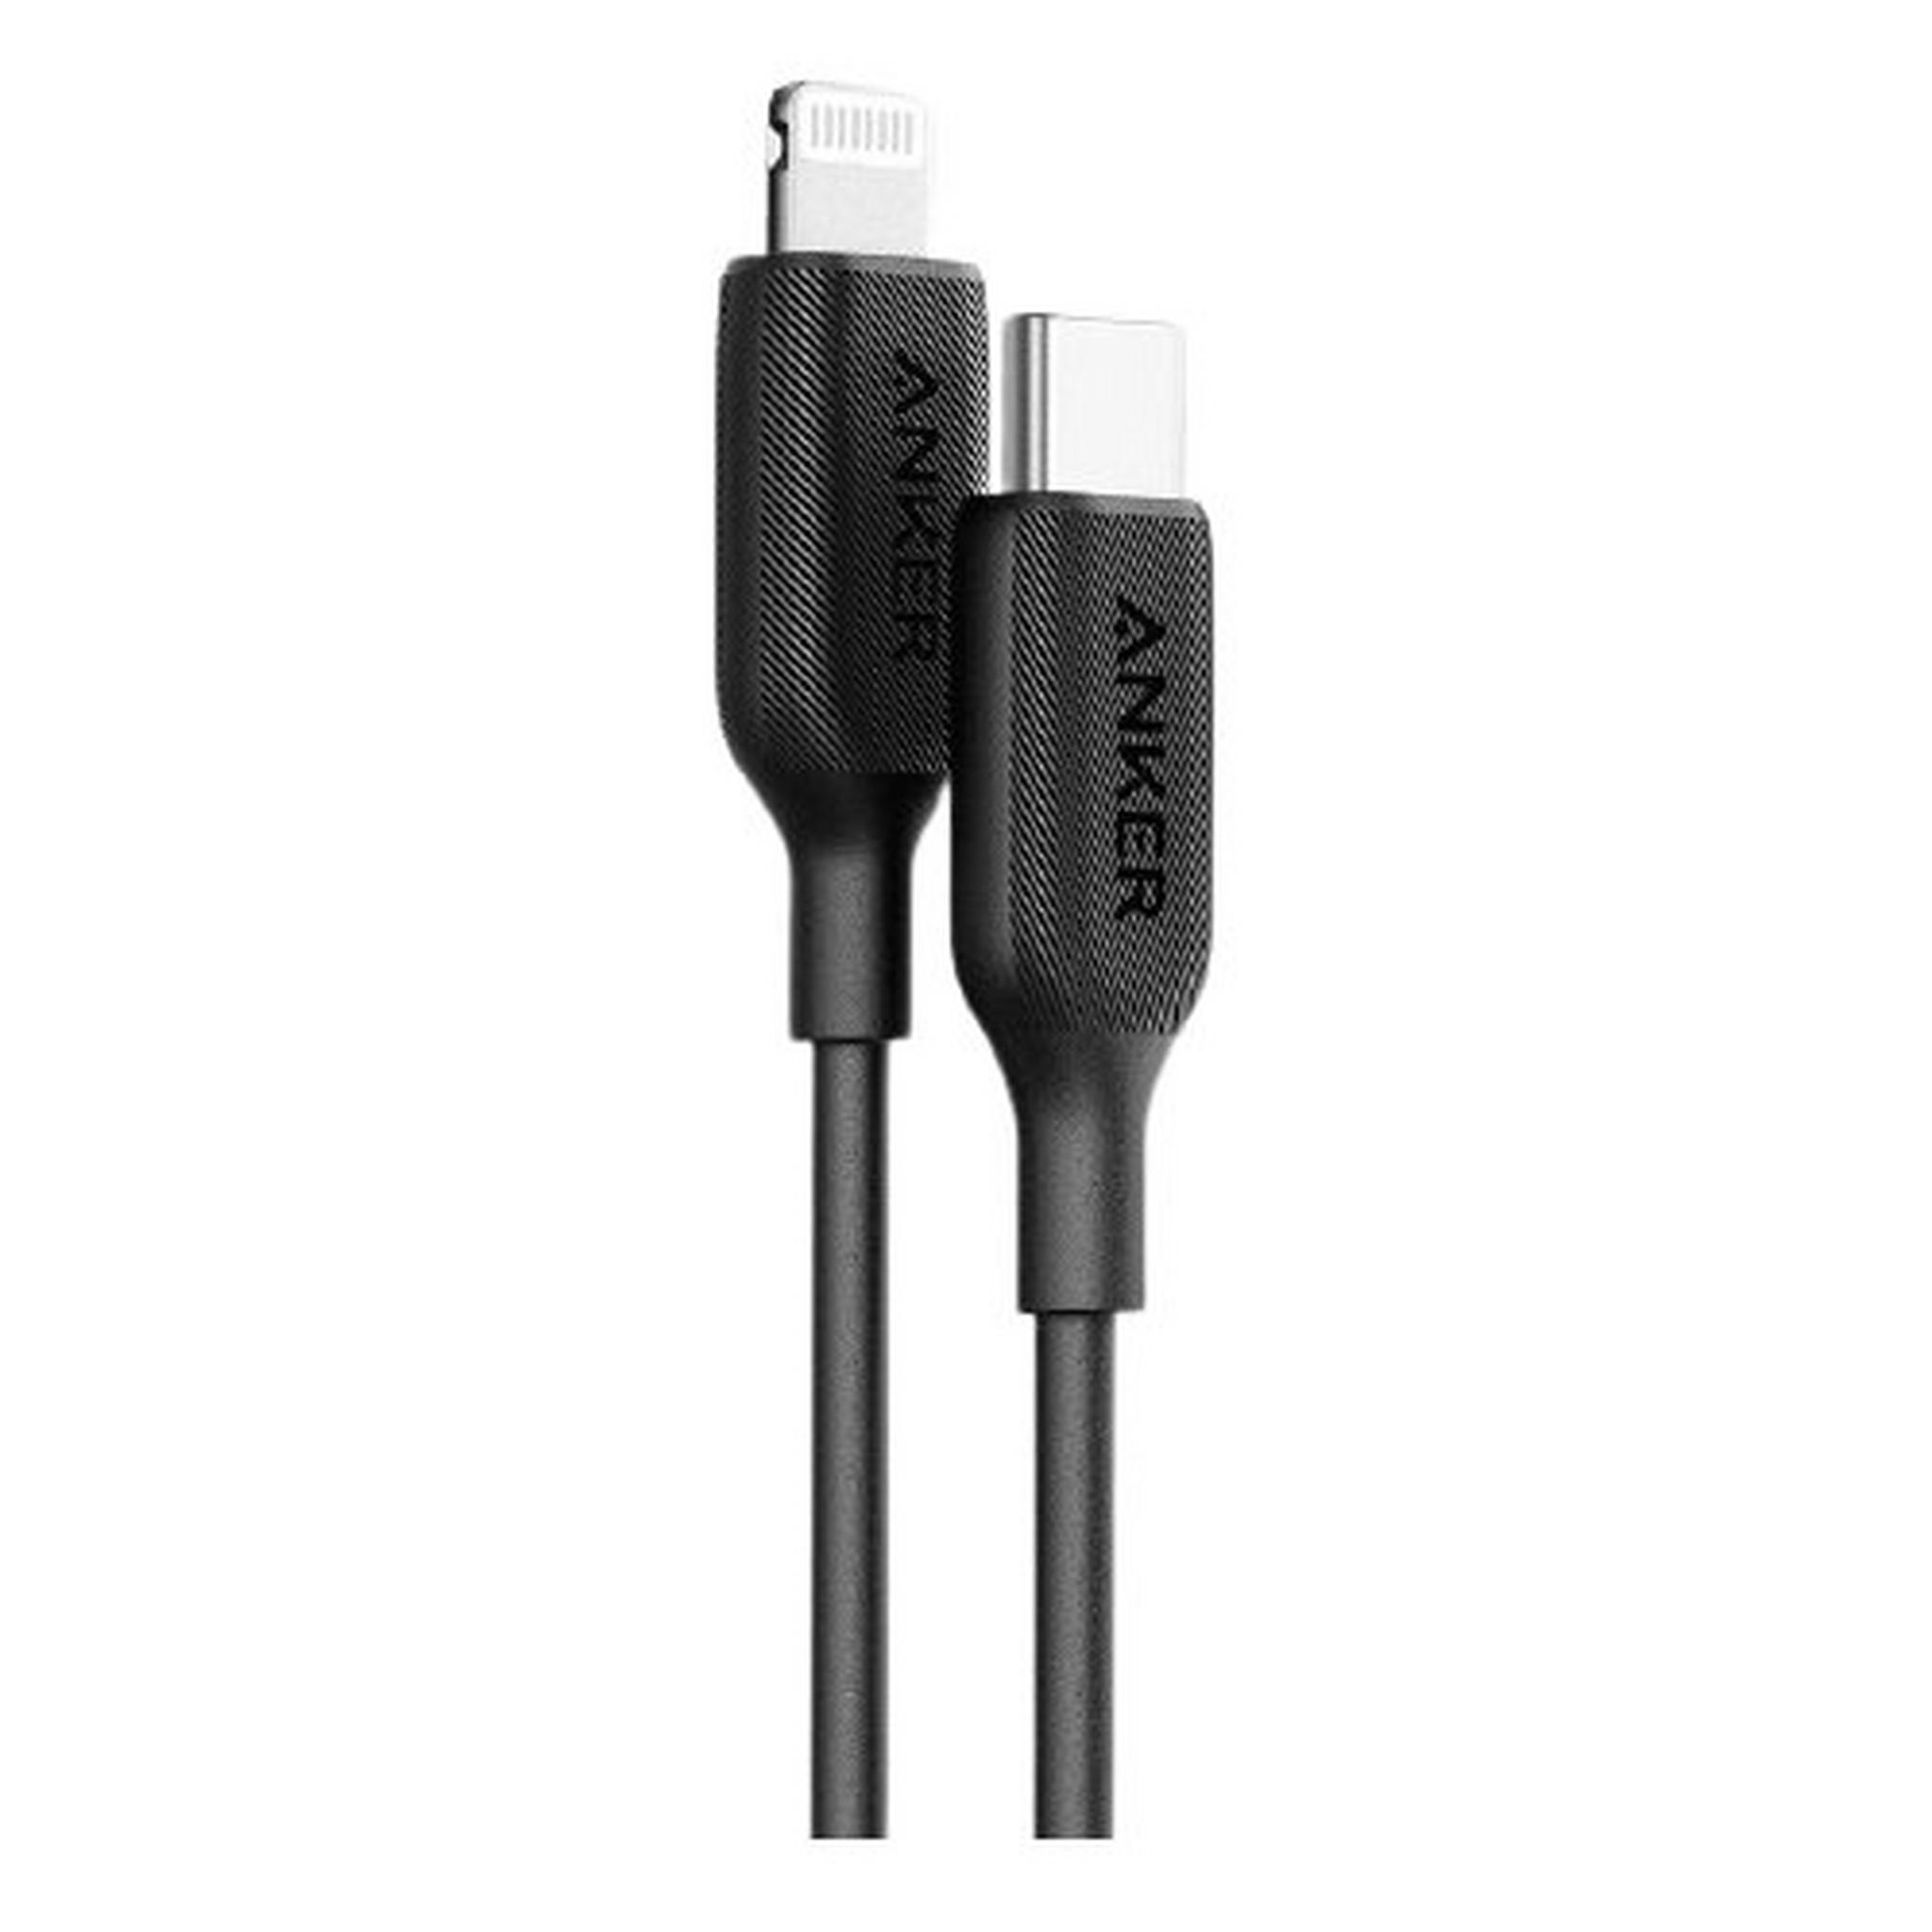 Anker Powerline III USB-C to Lighting (0.9m/3ft) Cable - Black